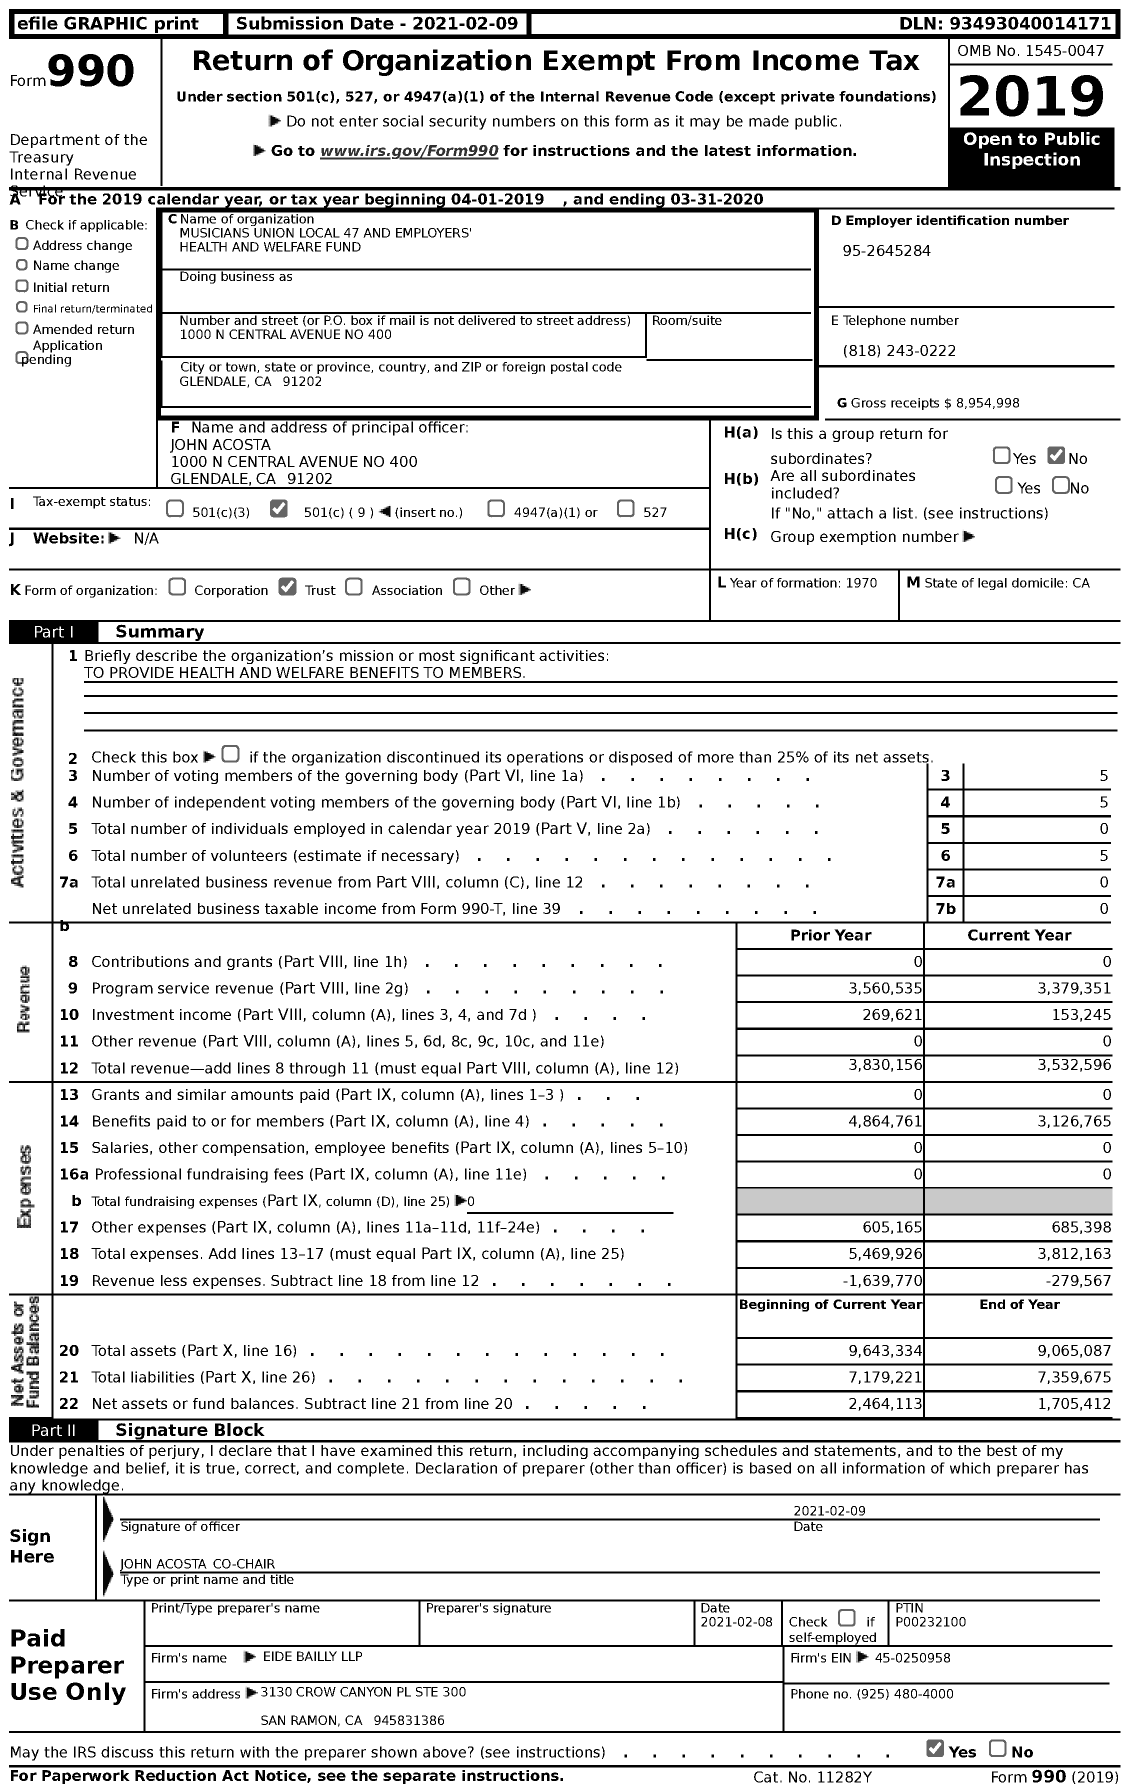 Image of first page of 2019 Form 990 for Musicians Local 47 and Employers' Health and Welfare Fund